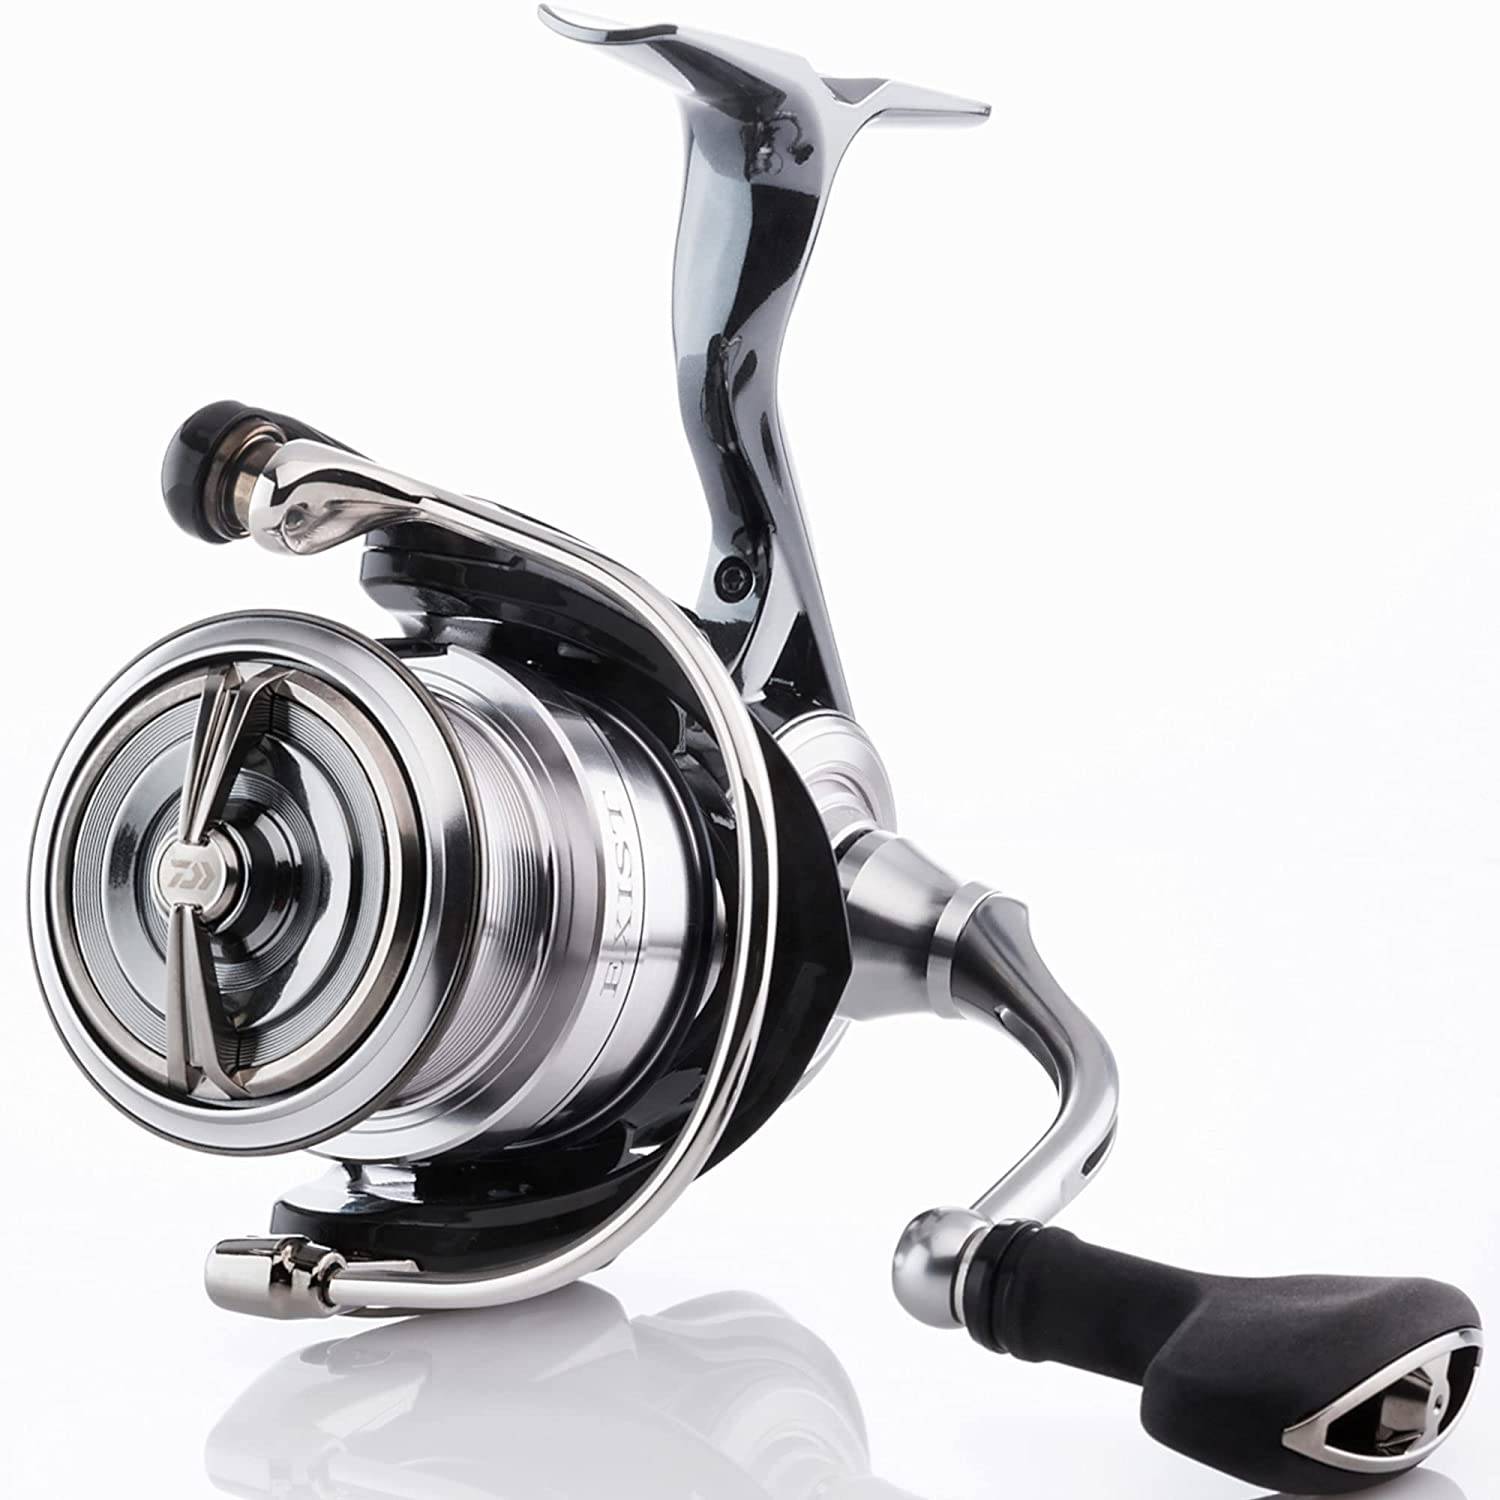 Daiwa Exist G LT 1000 Spinning Reel existglt1000d-p - Discovery Japan Mall